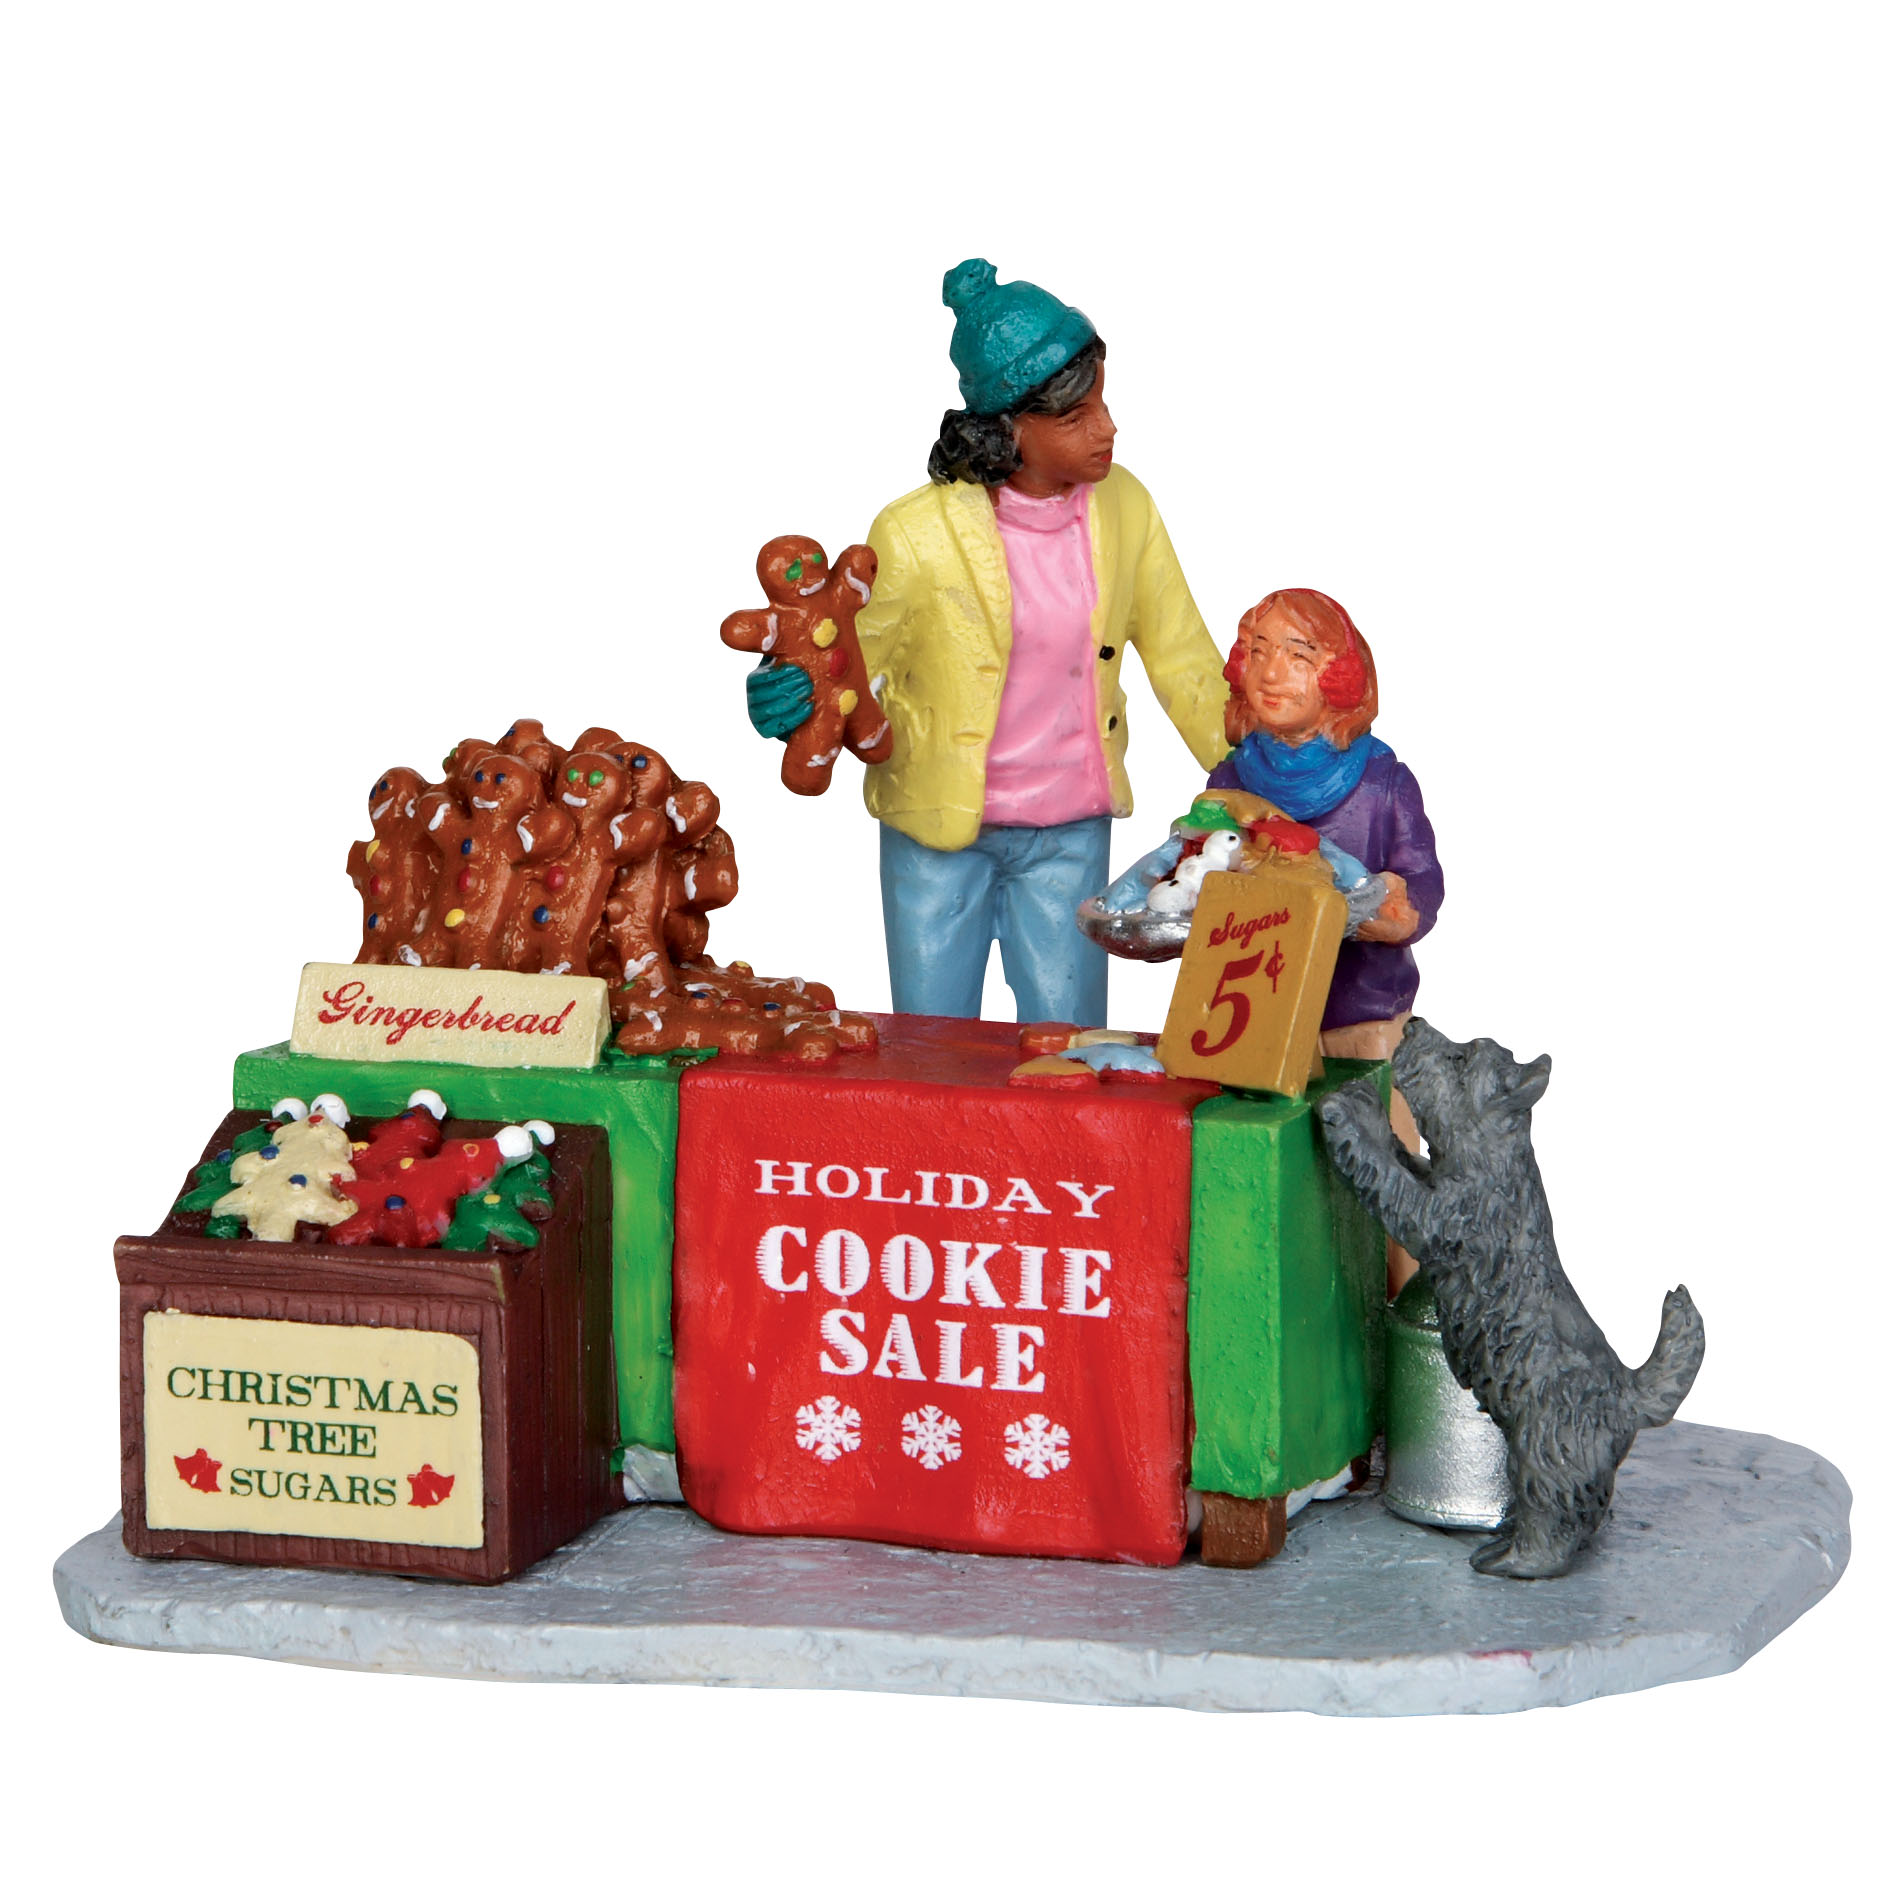 Lemax Village Collection Christmas Village Accessory, Holiday Cookie Sale